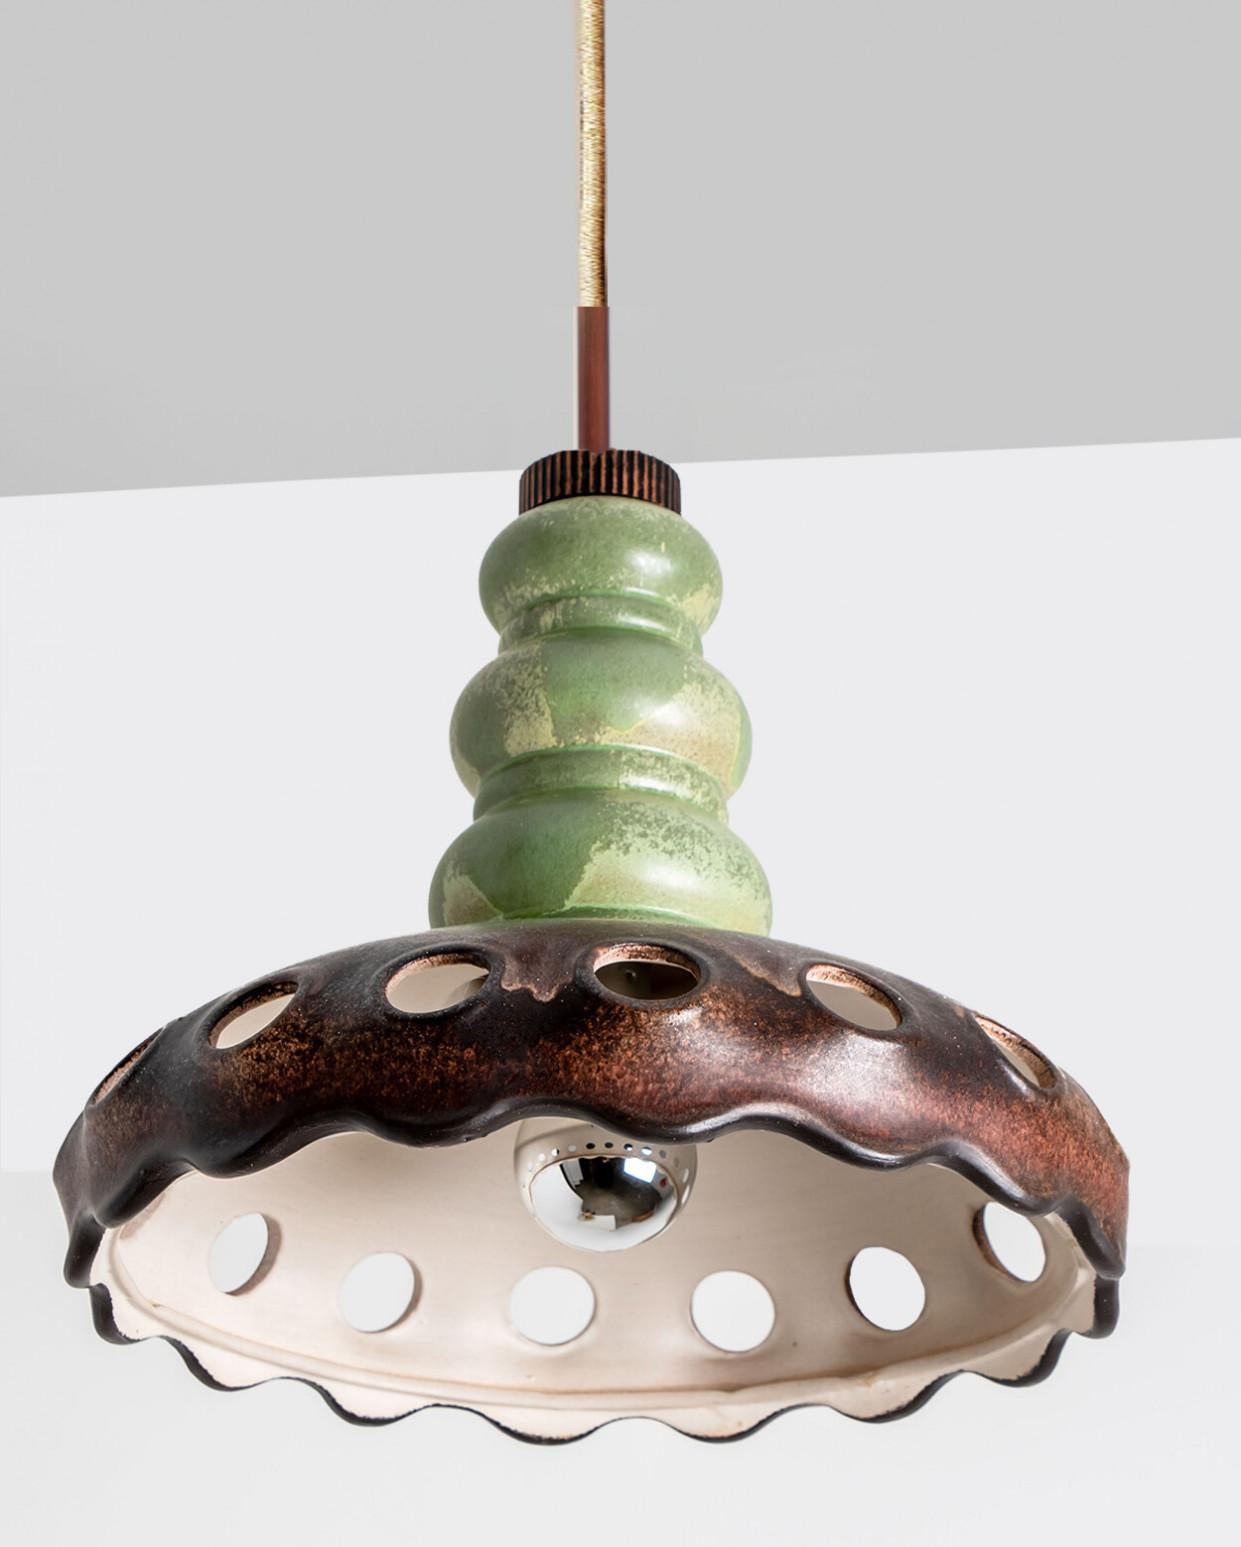 Beautiful round hanging lamp with an unusual shape, made with brown and green ceramic, manufactured in the 1970s in Germany.

Dimensions:
Diameter: 13.39